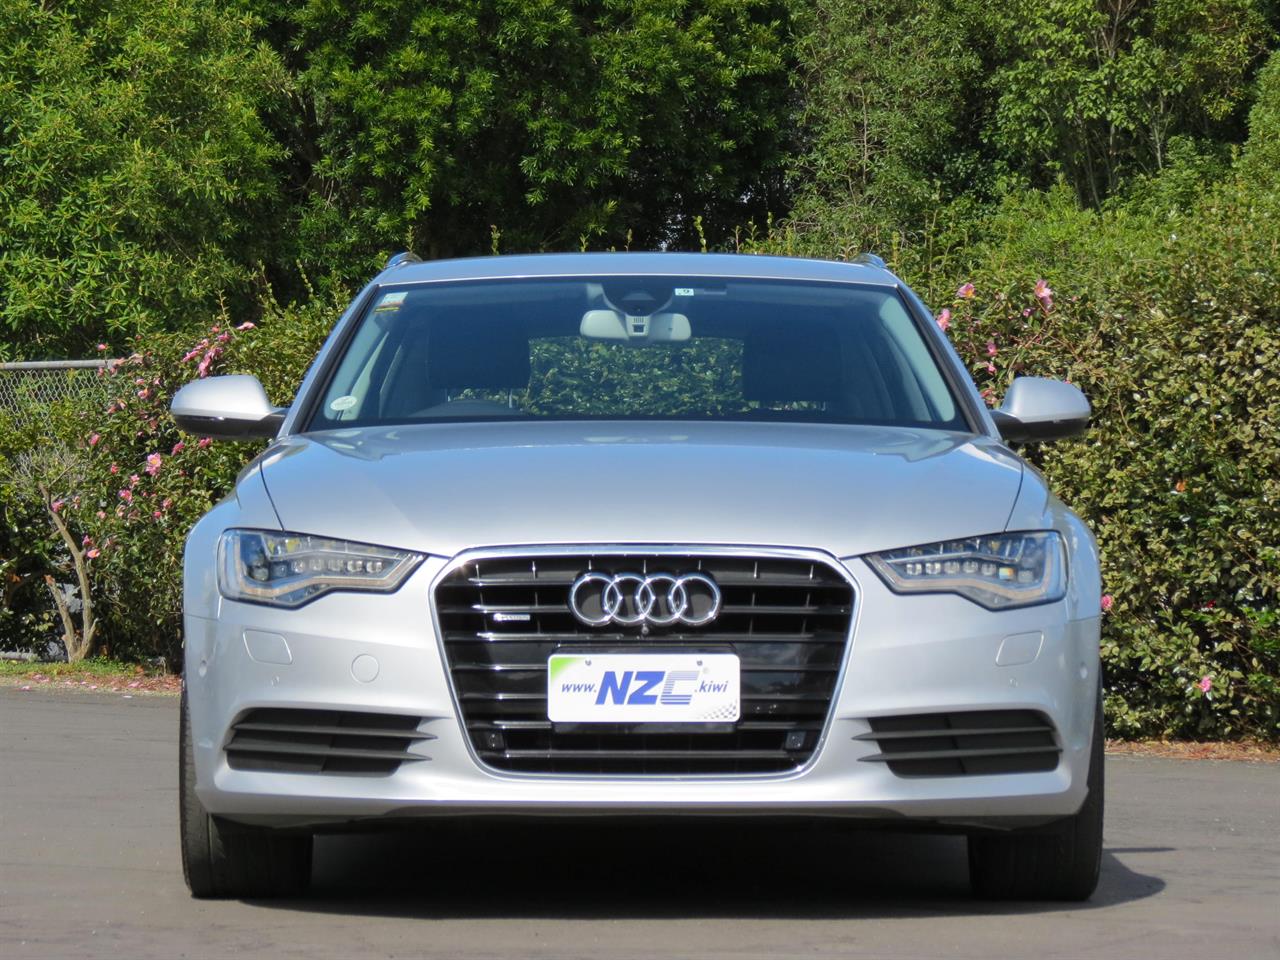 2013 Audi A6 only $61 weekly